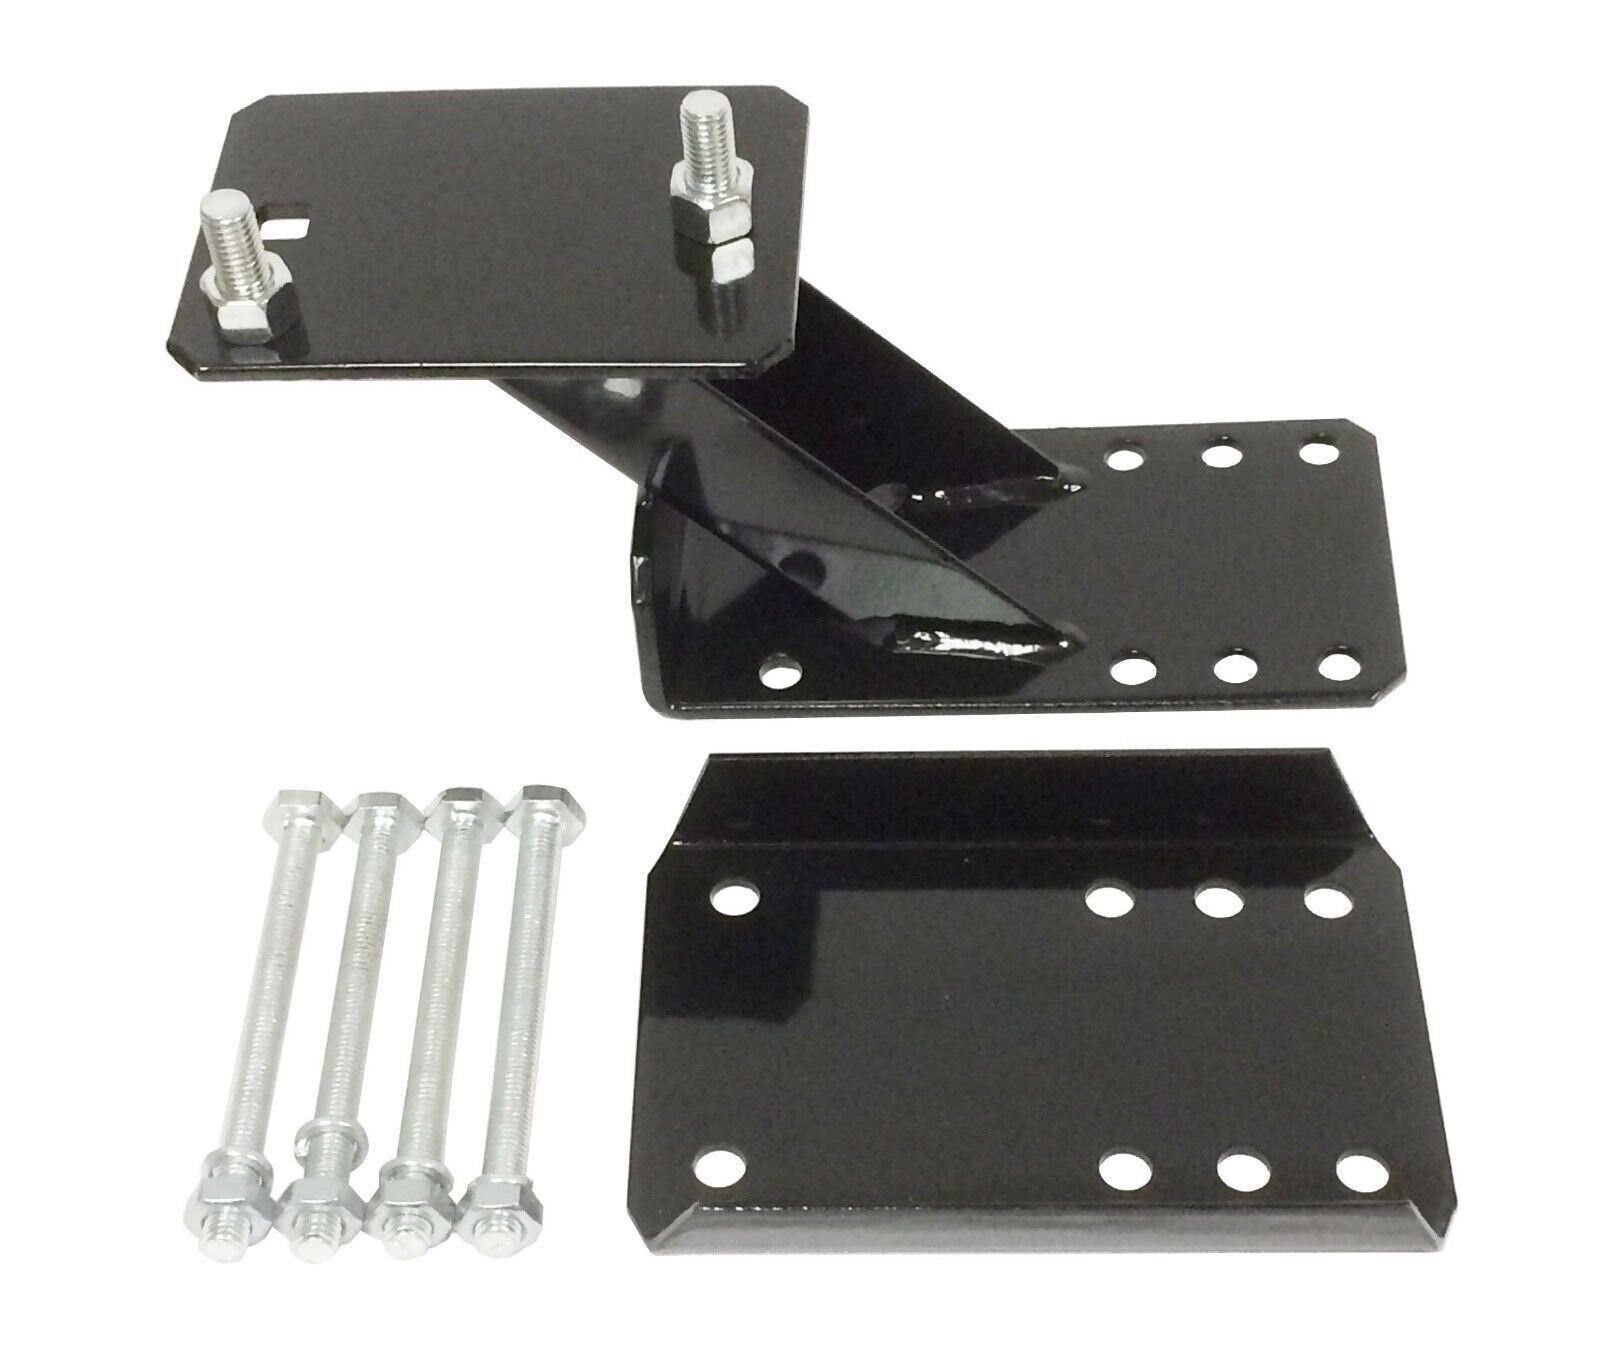 Heavy Duty Trailer Spare Tire Wheel Mount Holder Carrier for 4 & 5 lugs - 27010